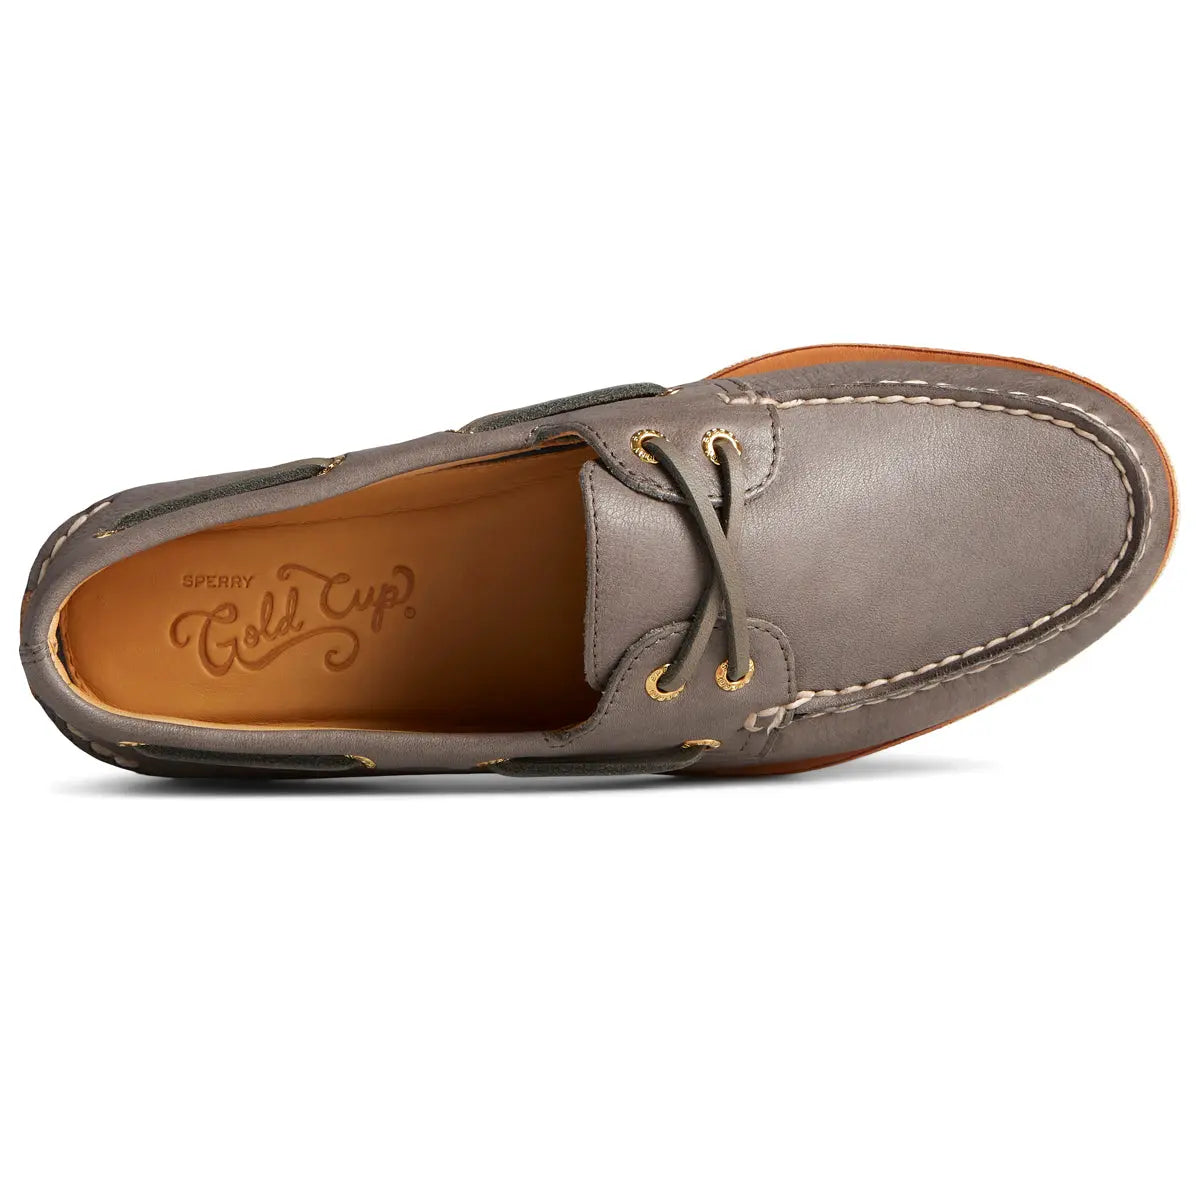 Charcoal Gold Cup Authentic Original 2-Eye Boat Shoe  Sperry   